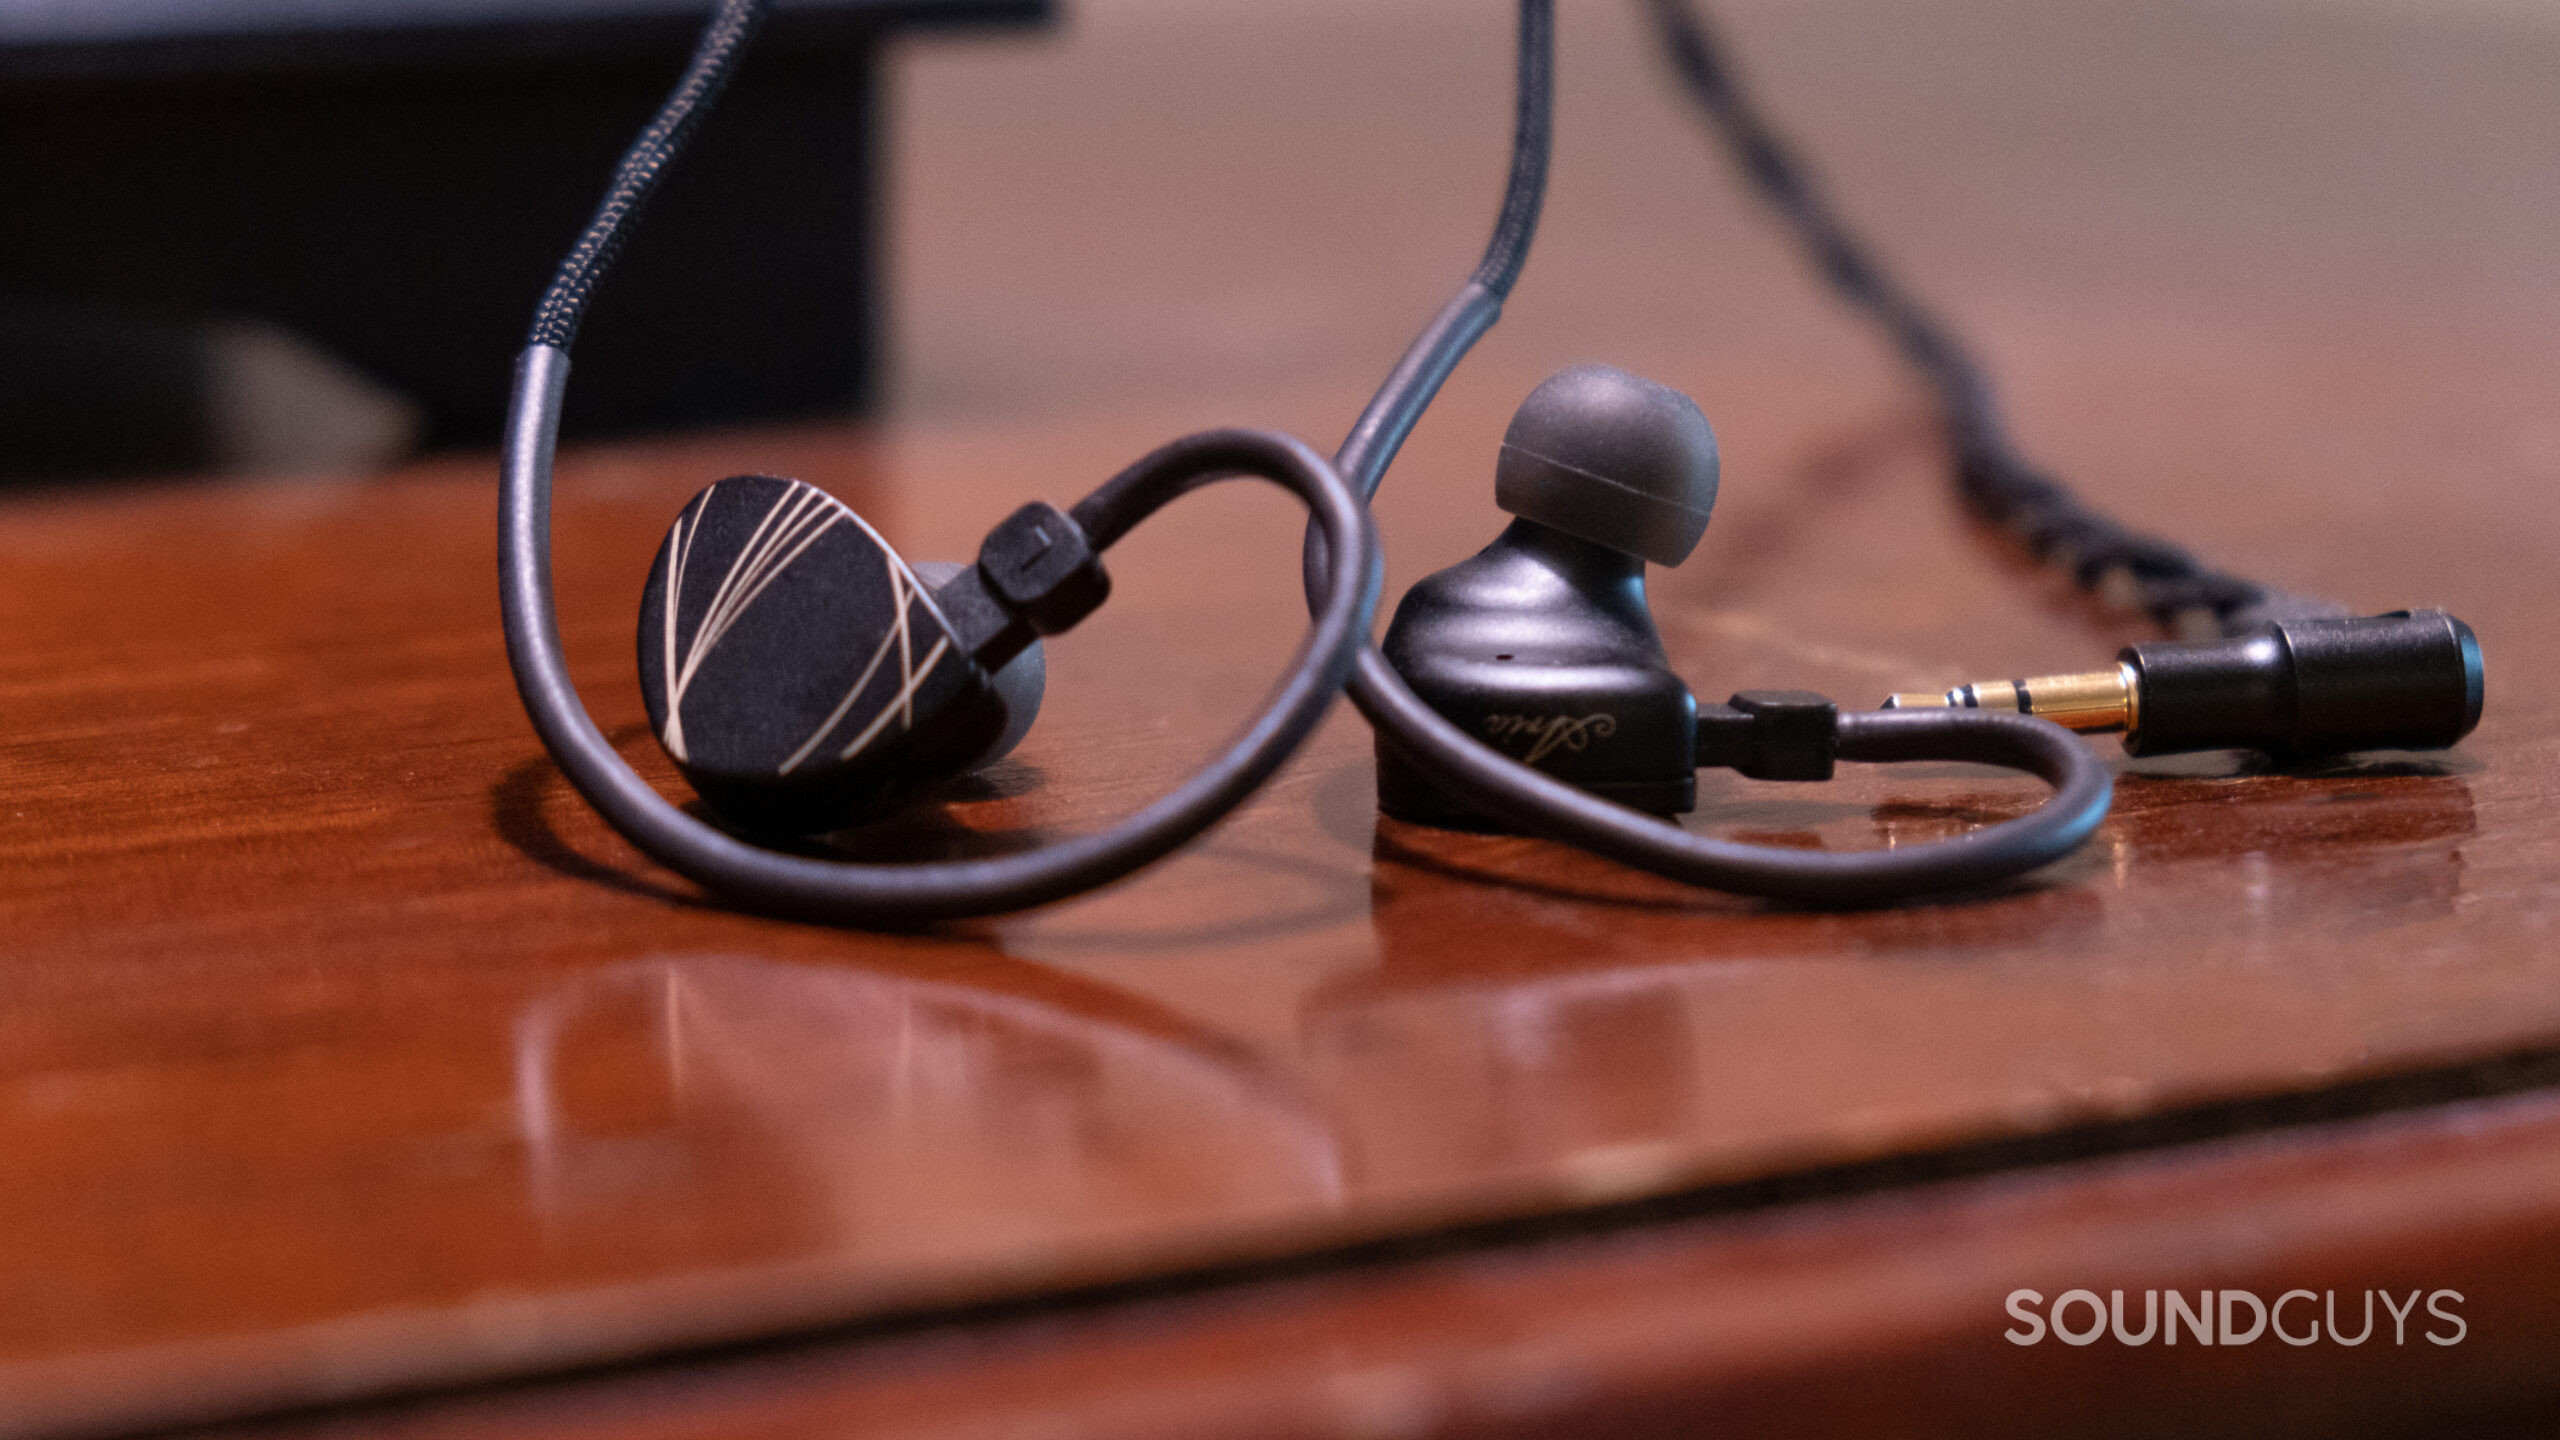 The Moondrop Aria earbuds shown close up on a dark wood surface.